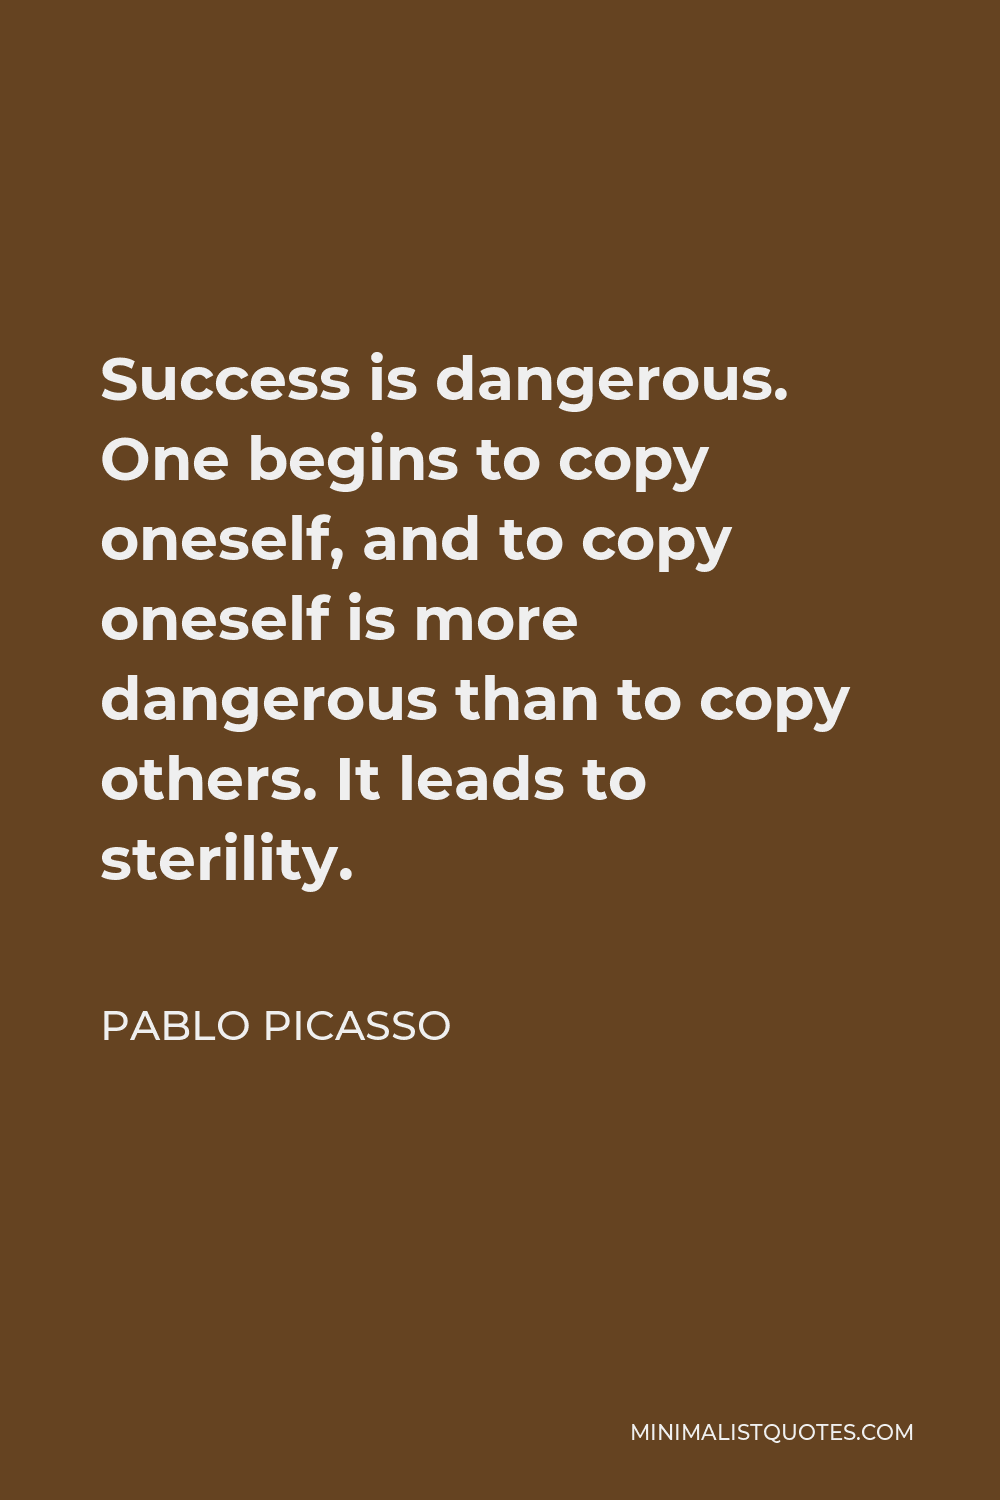 Pablo Picasso Quote - Success is dangerous. One begins to copy oneself, and to copy oneself is more dangerous than to copy others. It leads to sterility.